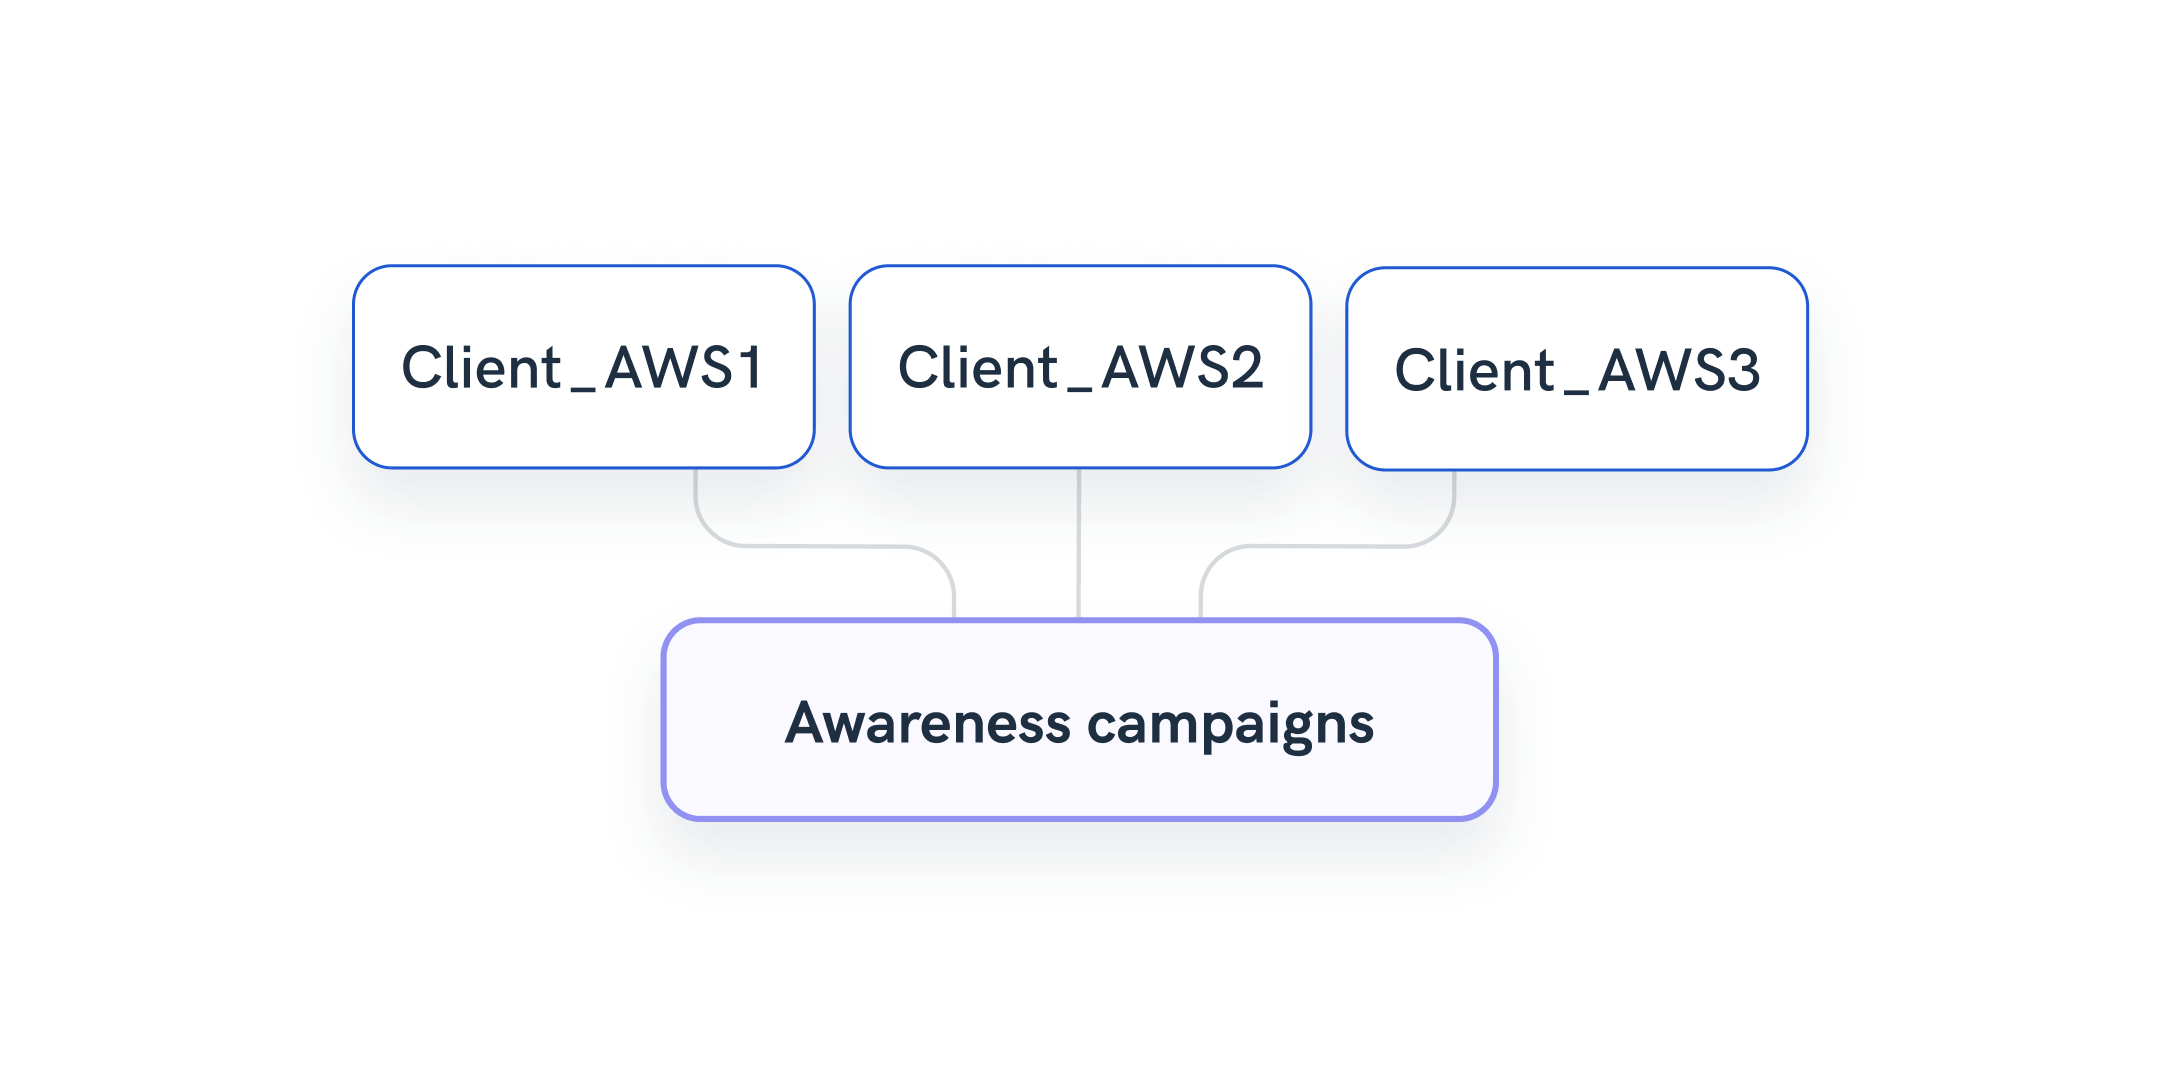 Group multiple campaigns data as a new dimension